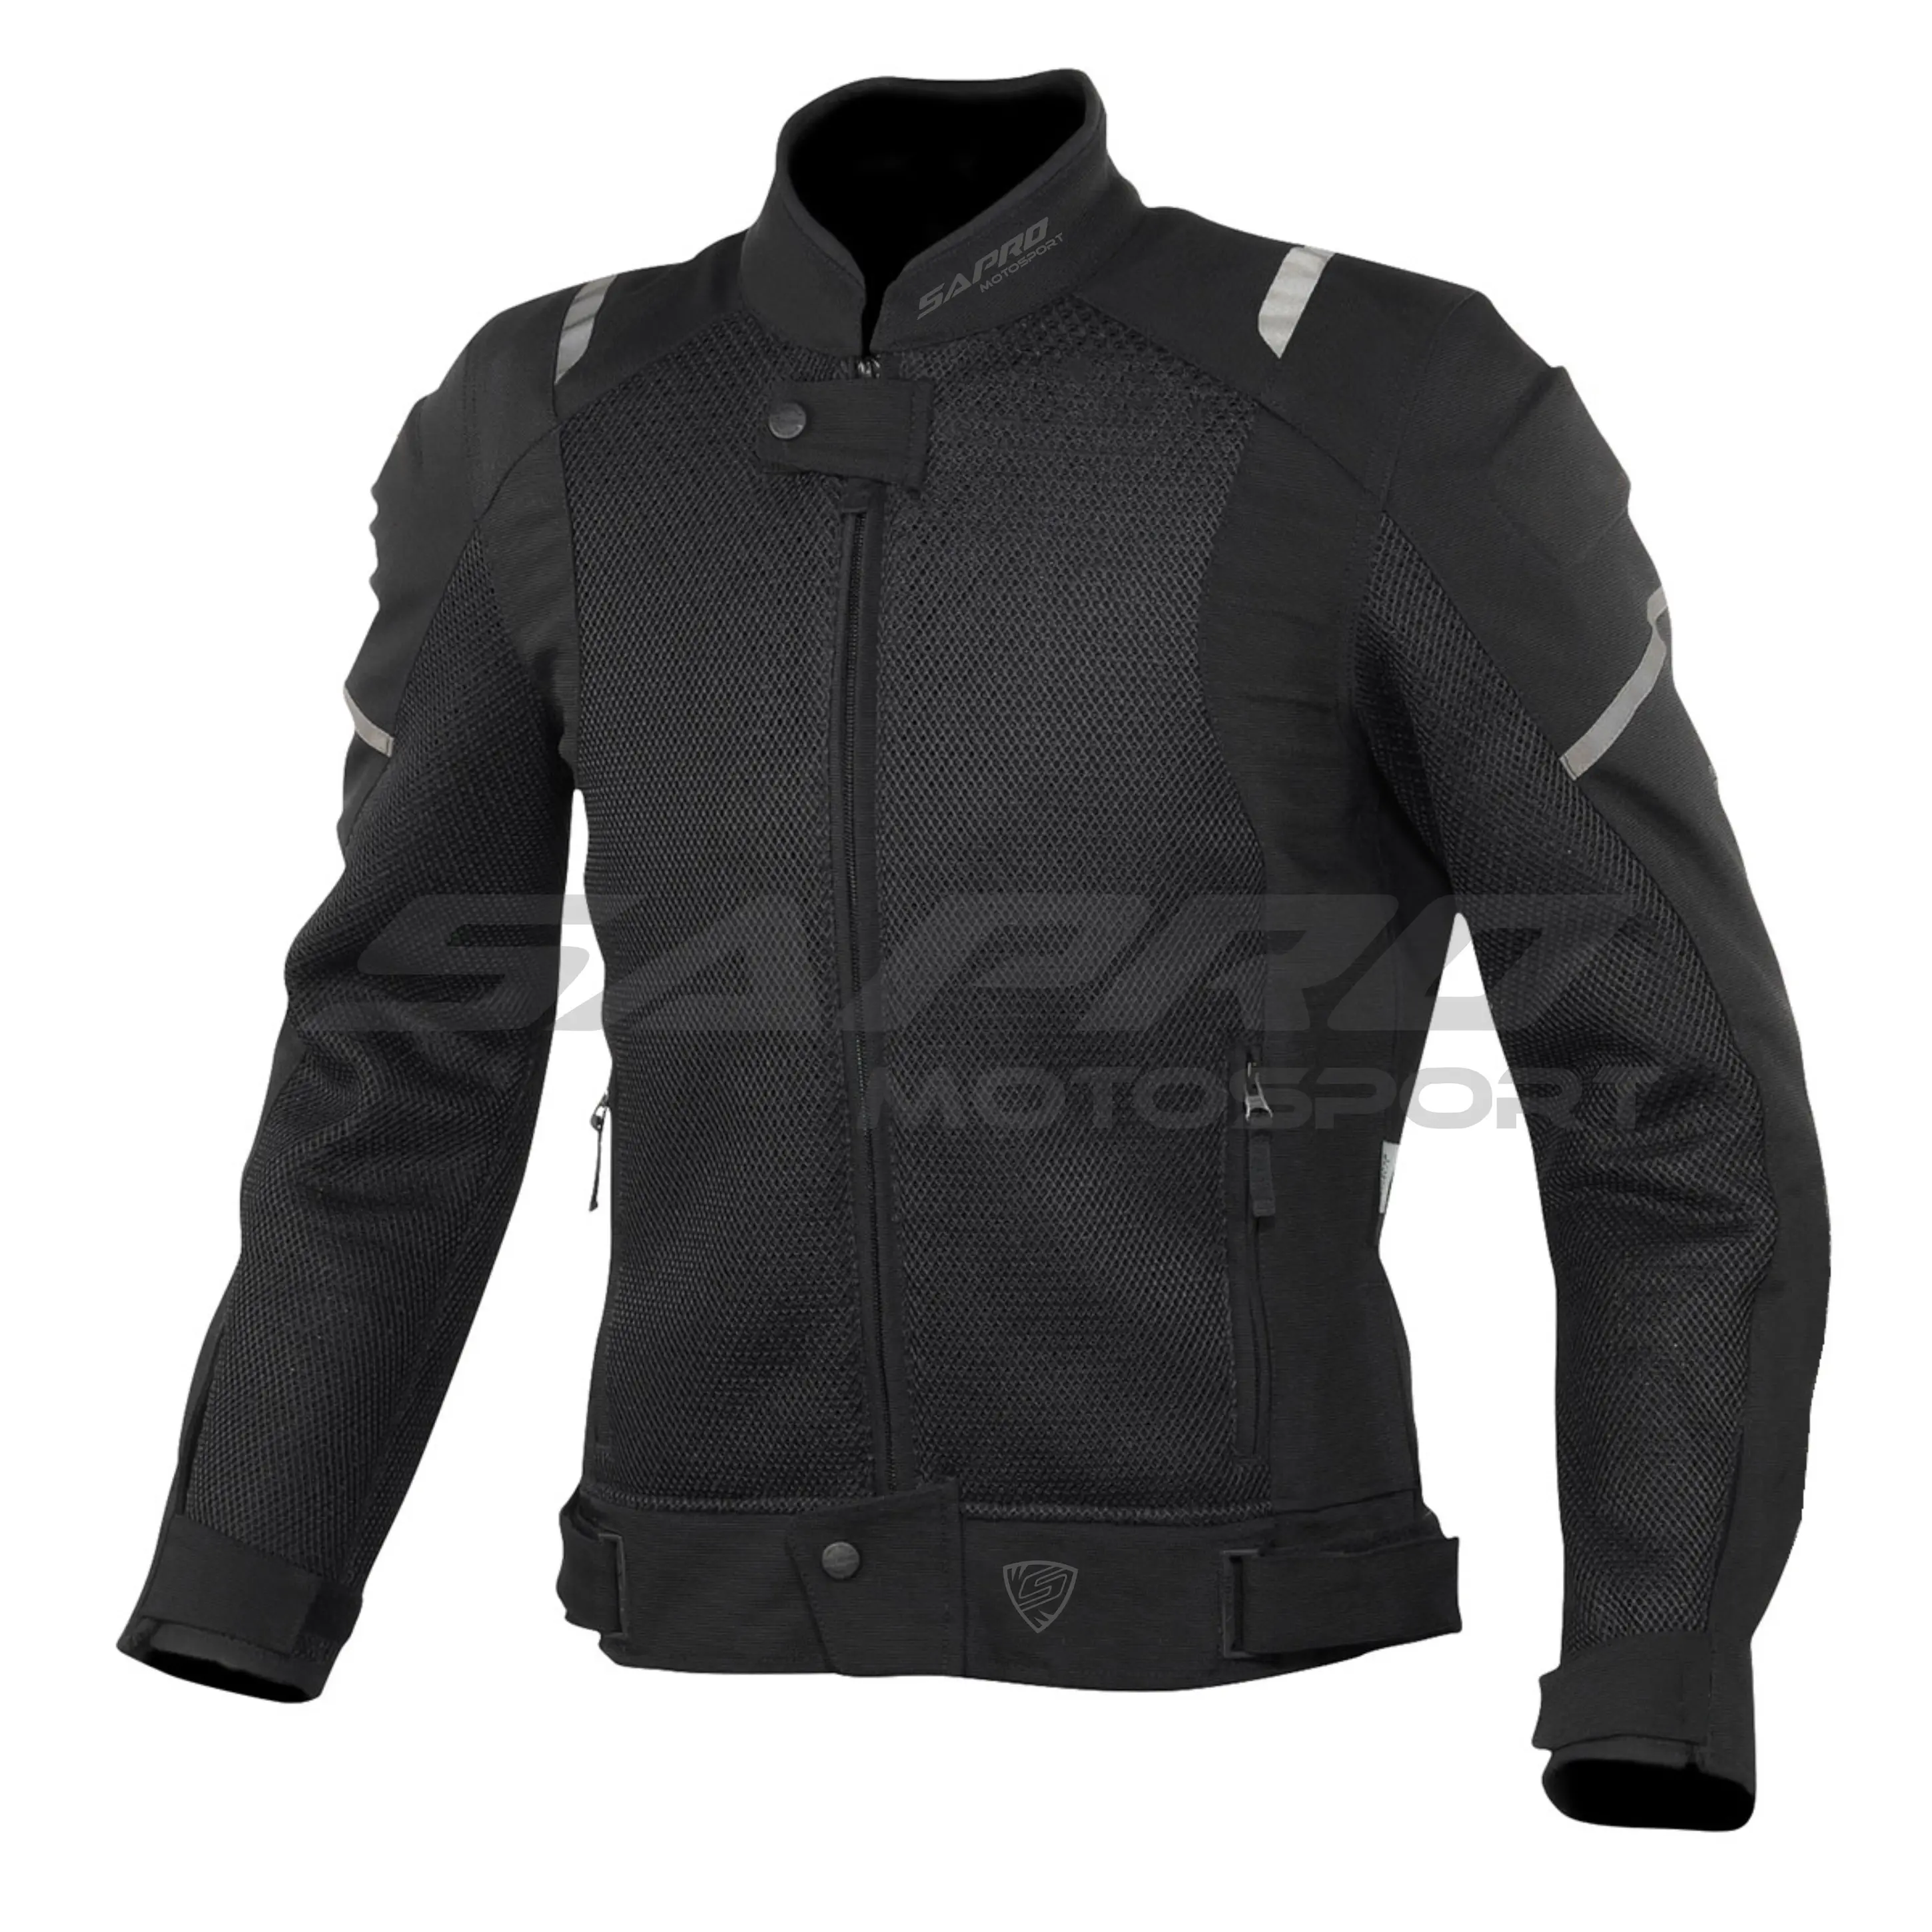 Water Proof Jacket With Pants Motorcycle Textile Riding Jacket Motorcycle Protection Jacket For Men Riding